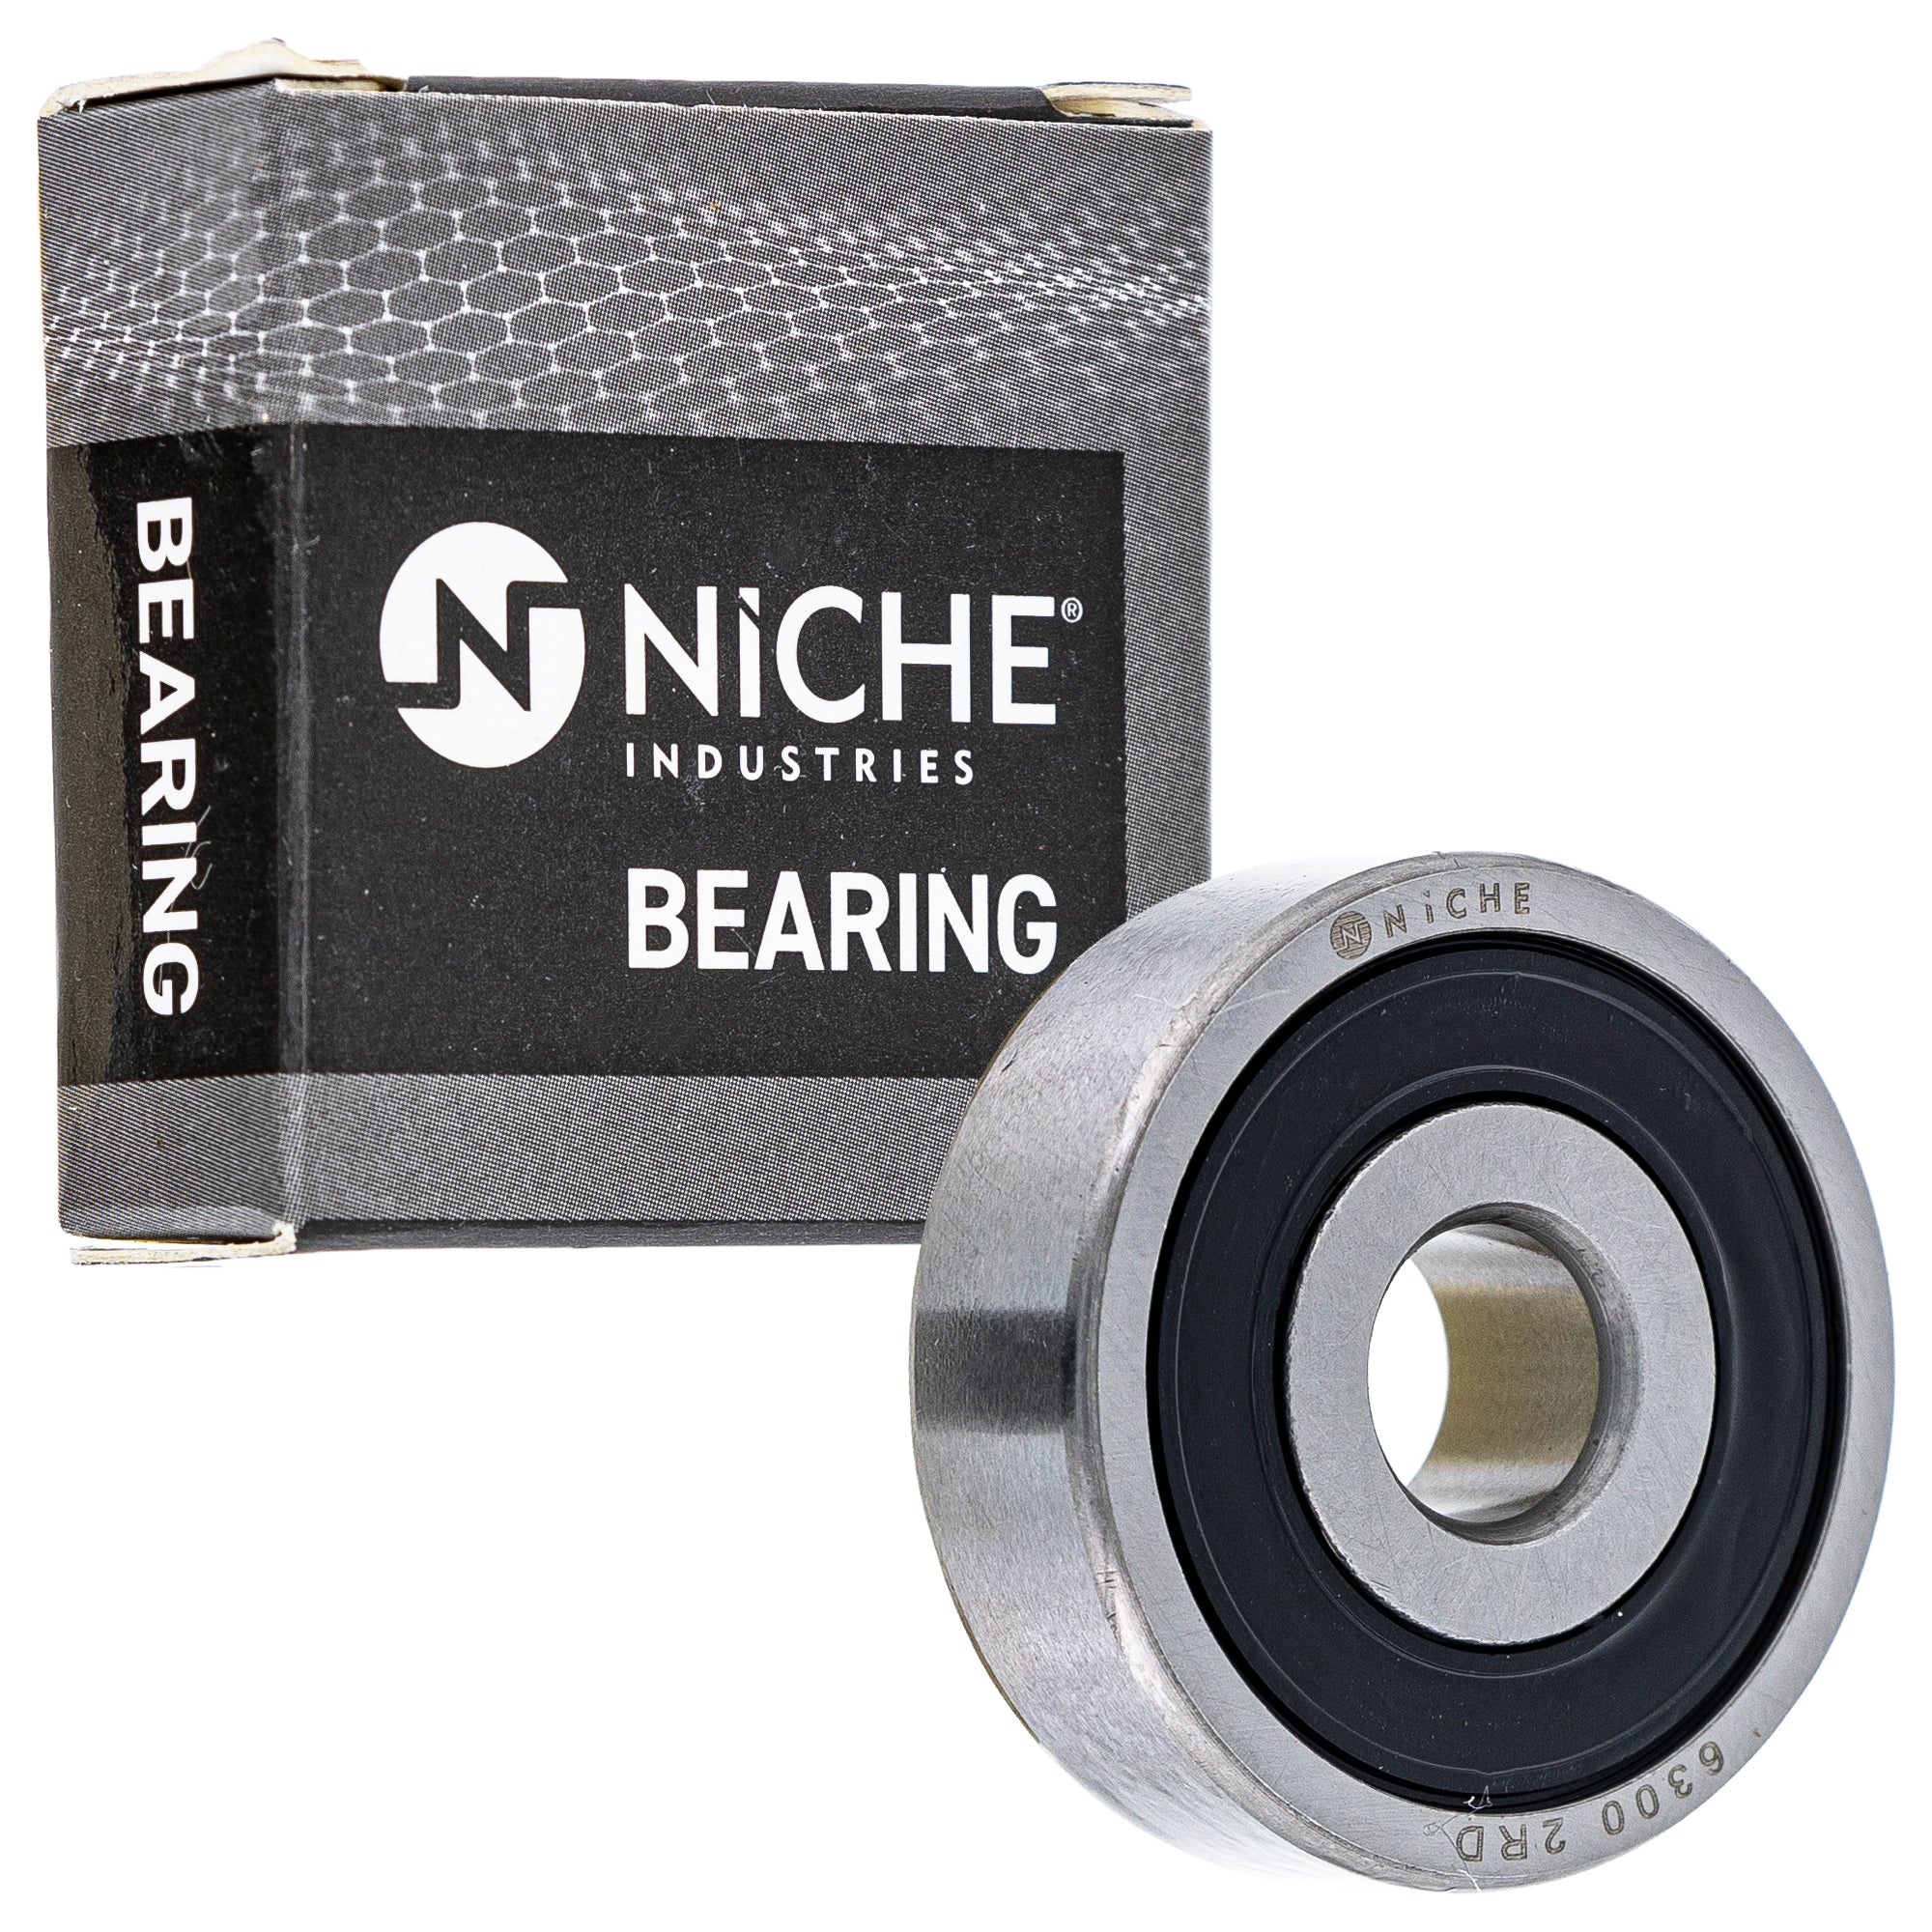 NICHE 519-CBB2331R Bearing 2-Pack for zOTHER RD60